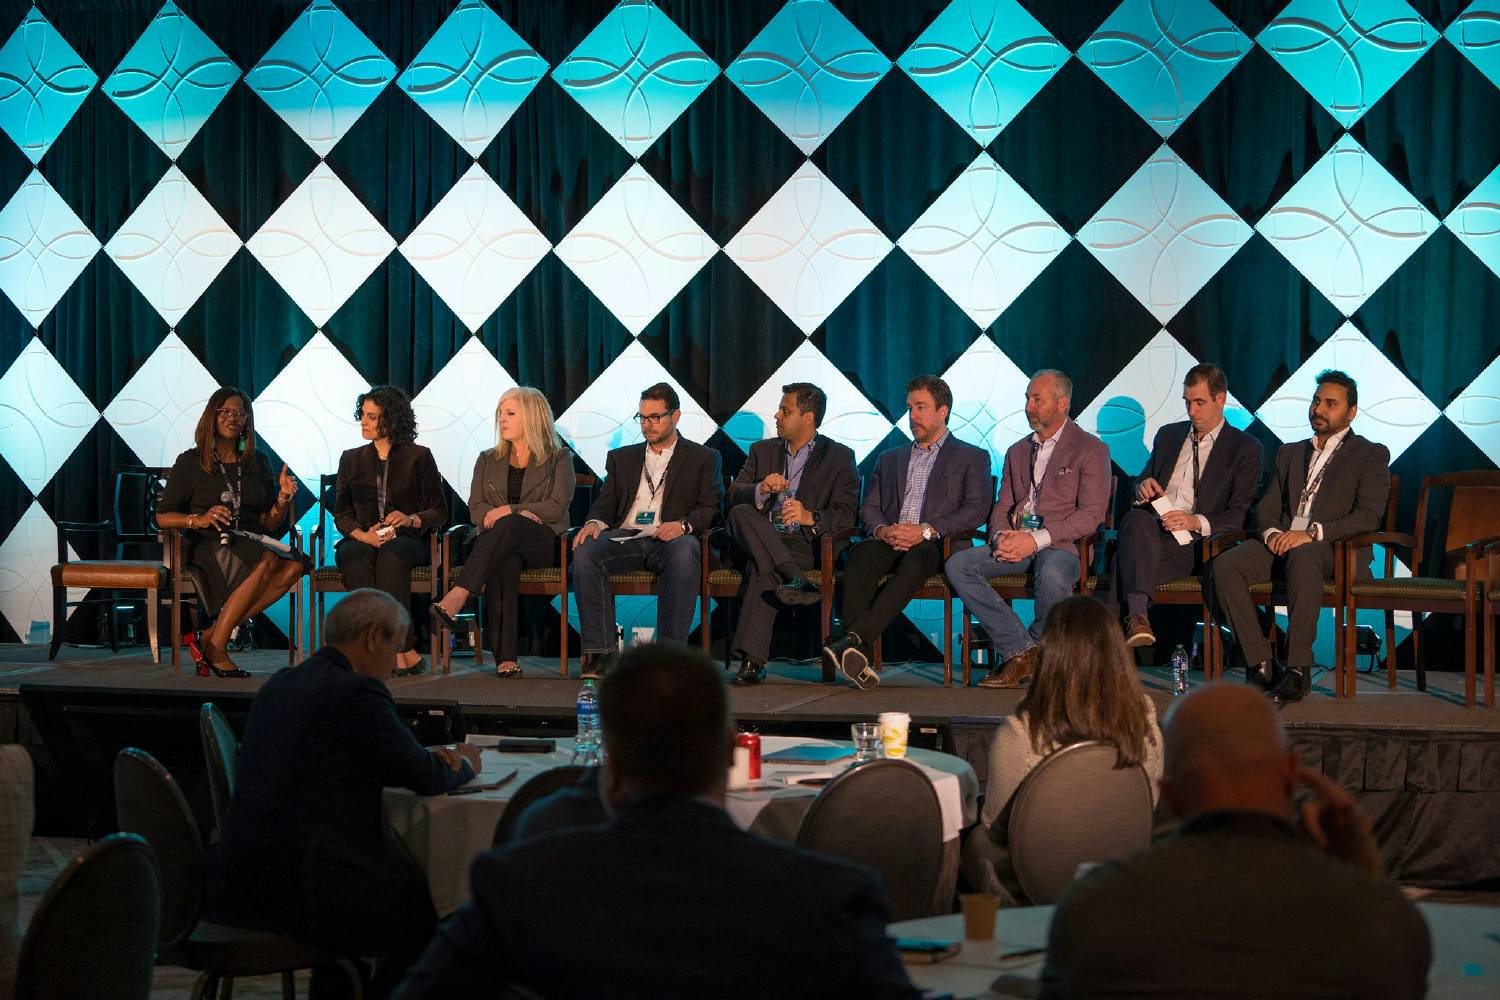 Progress Executive Leadership hosts Q&A session with leaders from across the company at the annual Leadership Summit.